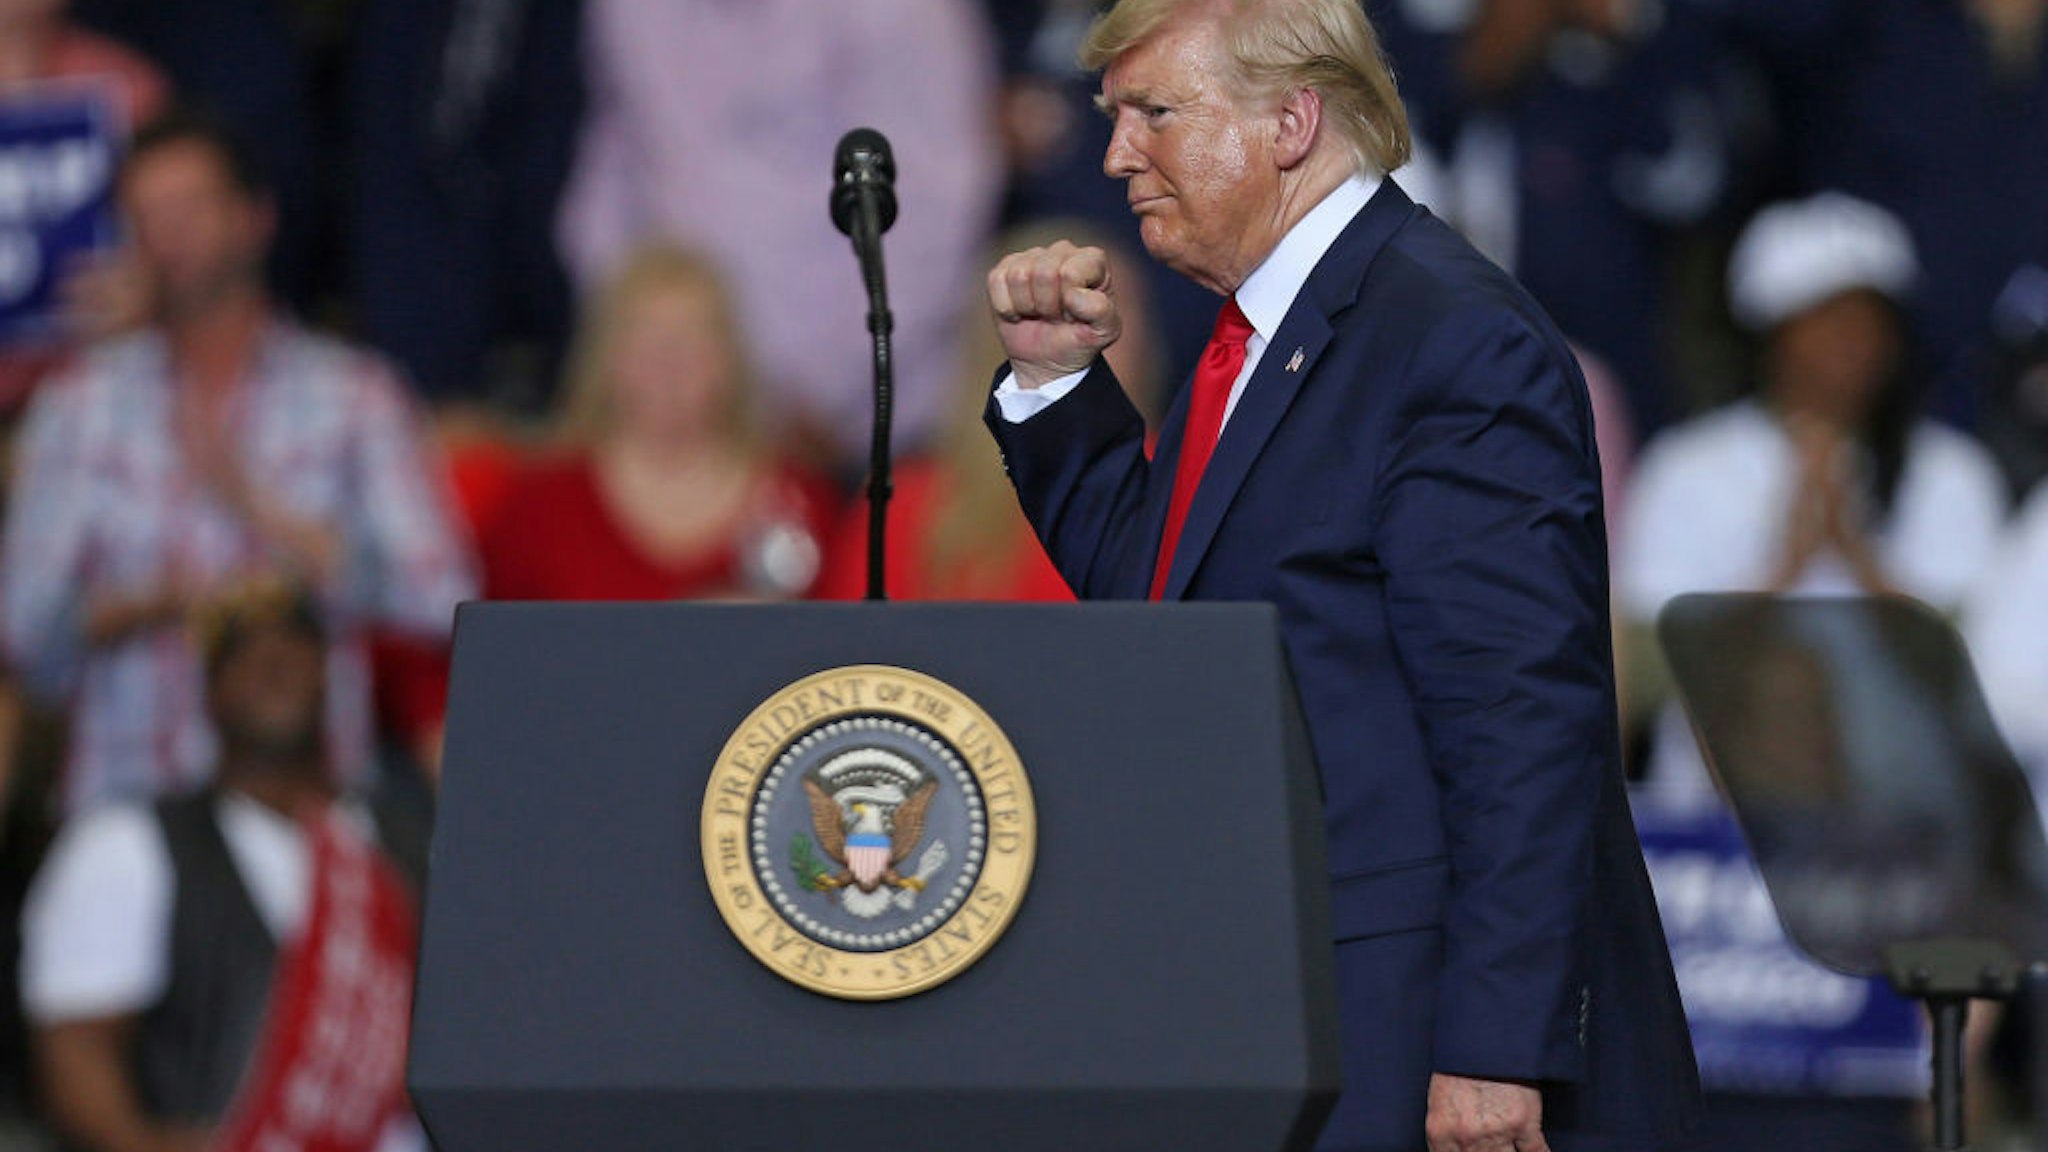 U.S. President Donald Trump gestures during a "Keep America Great" rally at the Monroe Civic Center on November 06, 2019 in Monroe, Louisiana. President Trump headlined the rally to support Louisiana Republican gubernatorial candidate Eddie Rispone, who is looking to unseat incumbent Democratic Gov. John Bel Edwards.